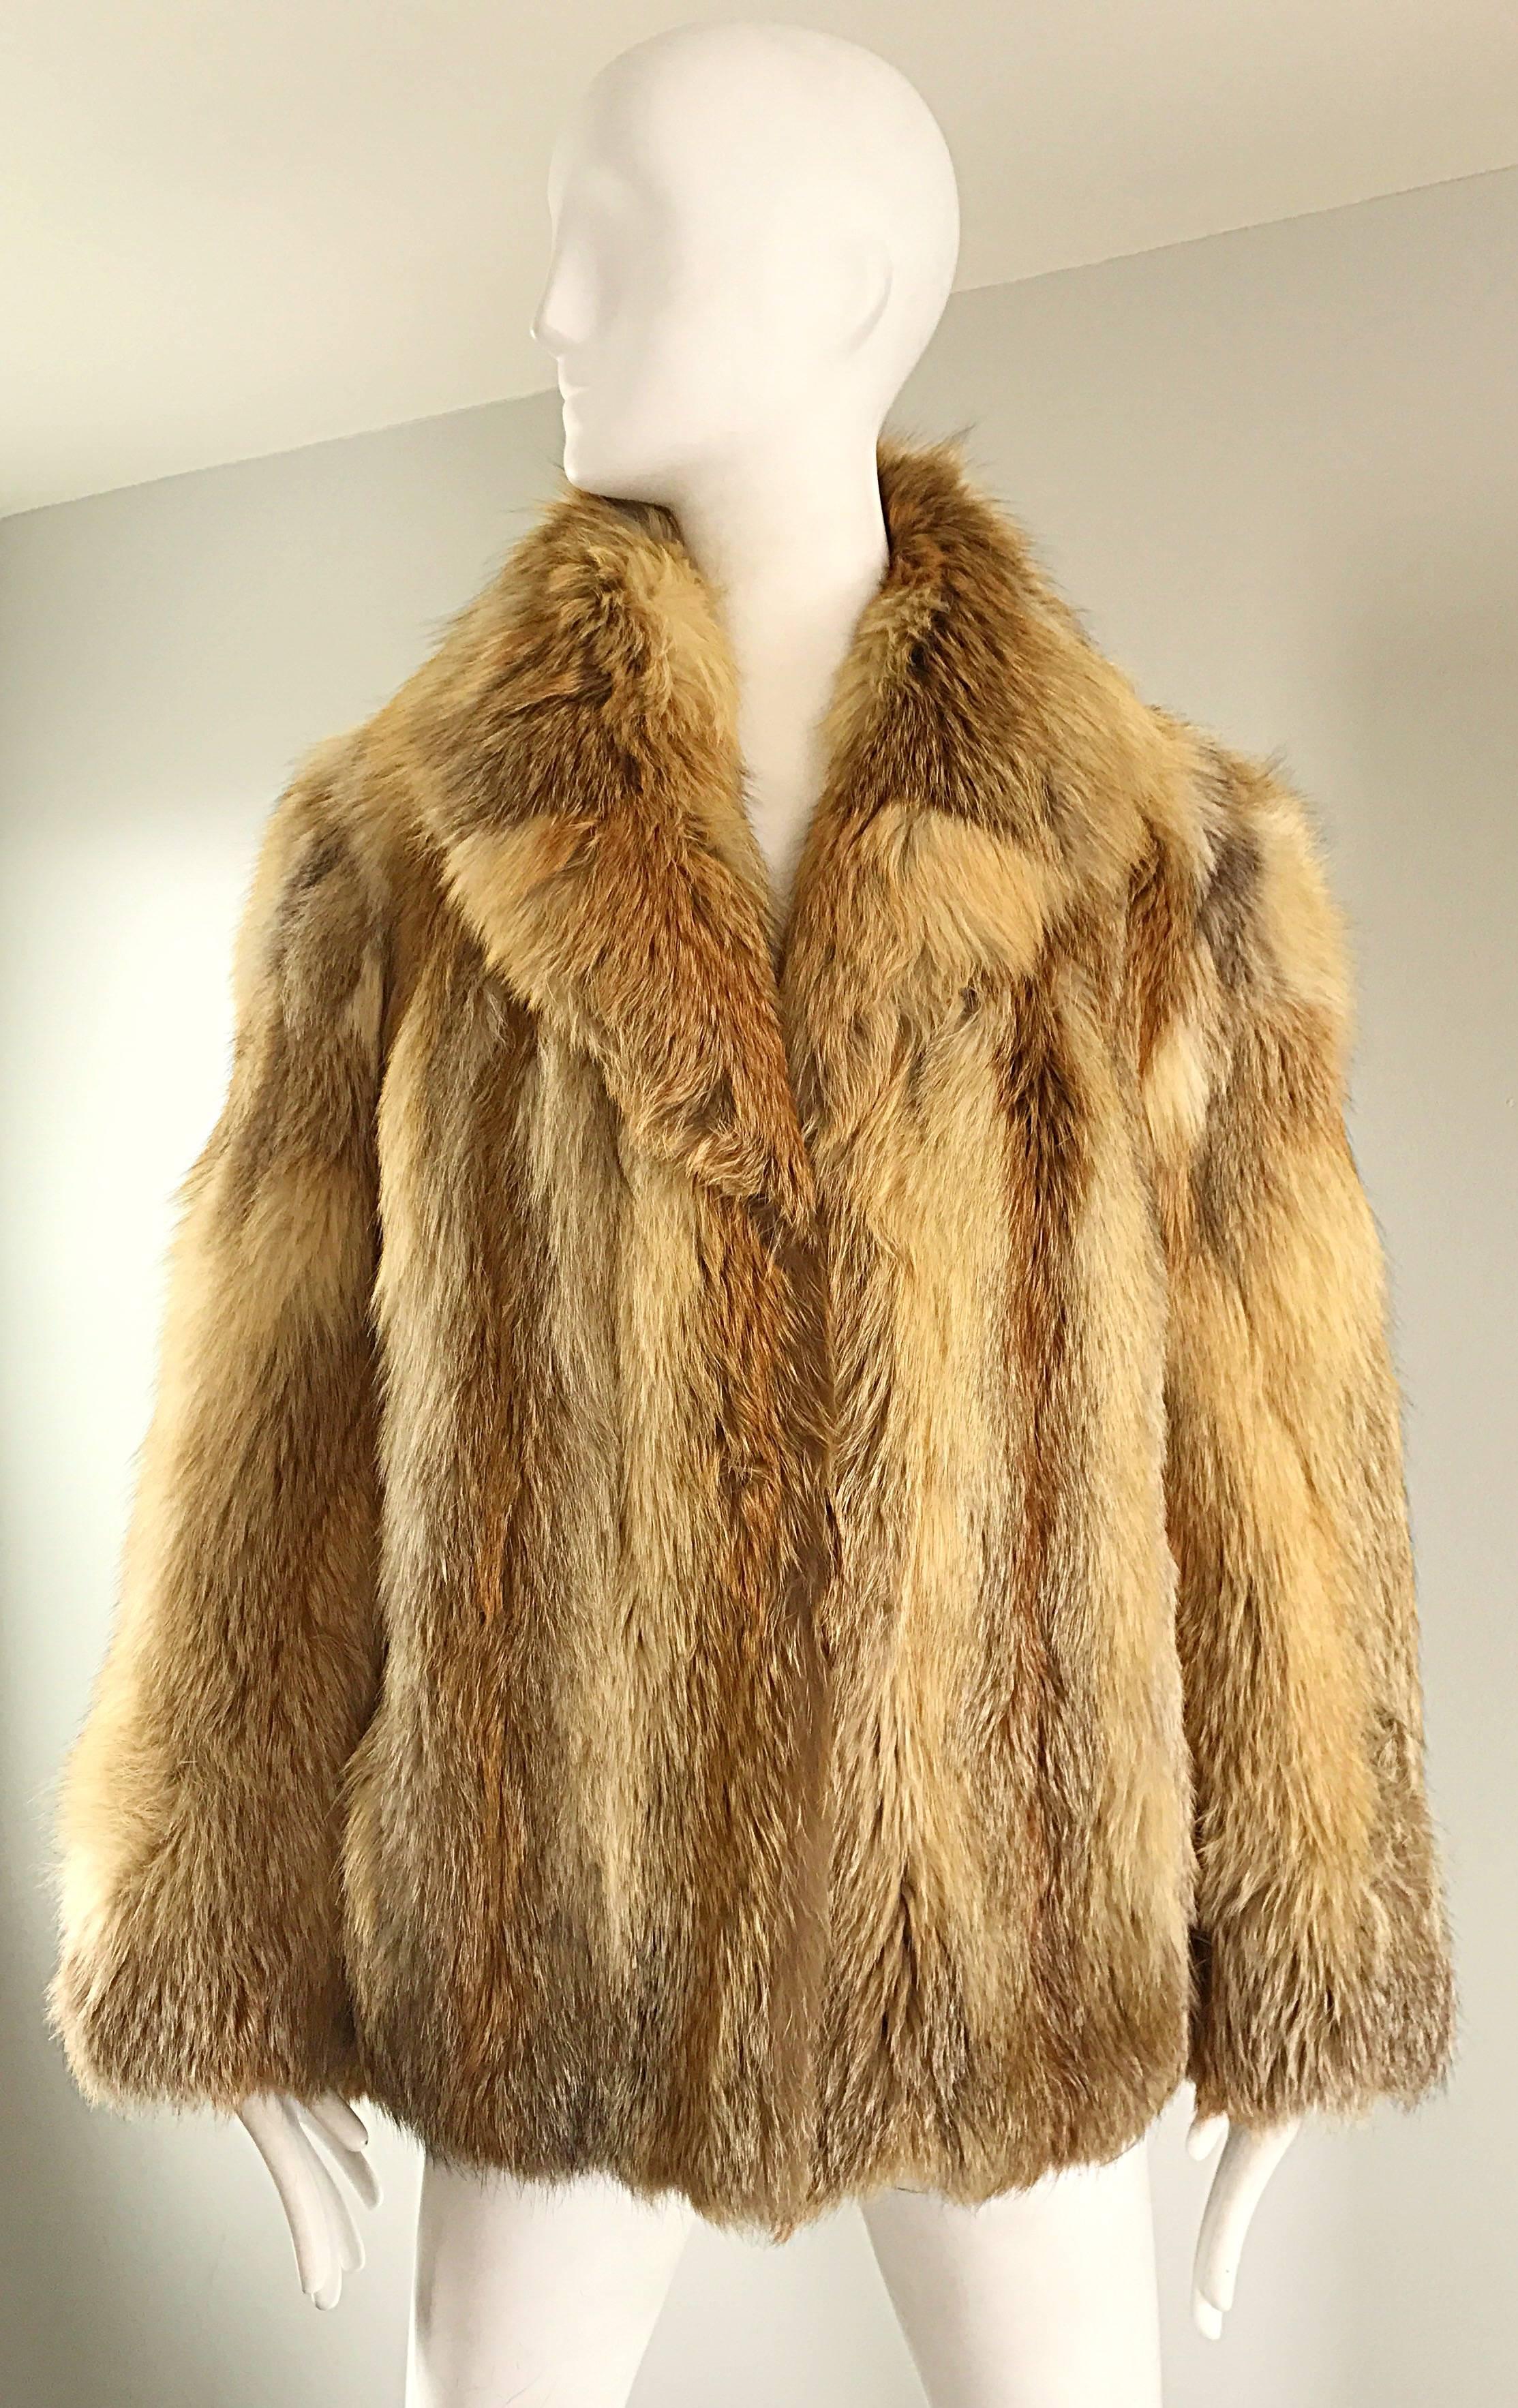 Gorgeous 1950s red fox fur jacket! Stored in a fur storage facility, and in excellent condition. Features the softest fox fur, with a beige silk lining. Two fur hook-and-eye closures up the front. Collar can be worn flipped up for extra warmth, or